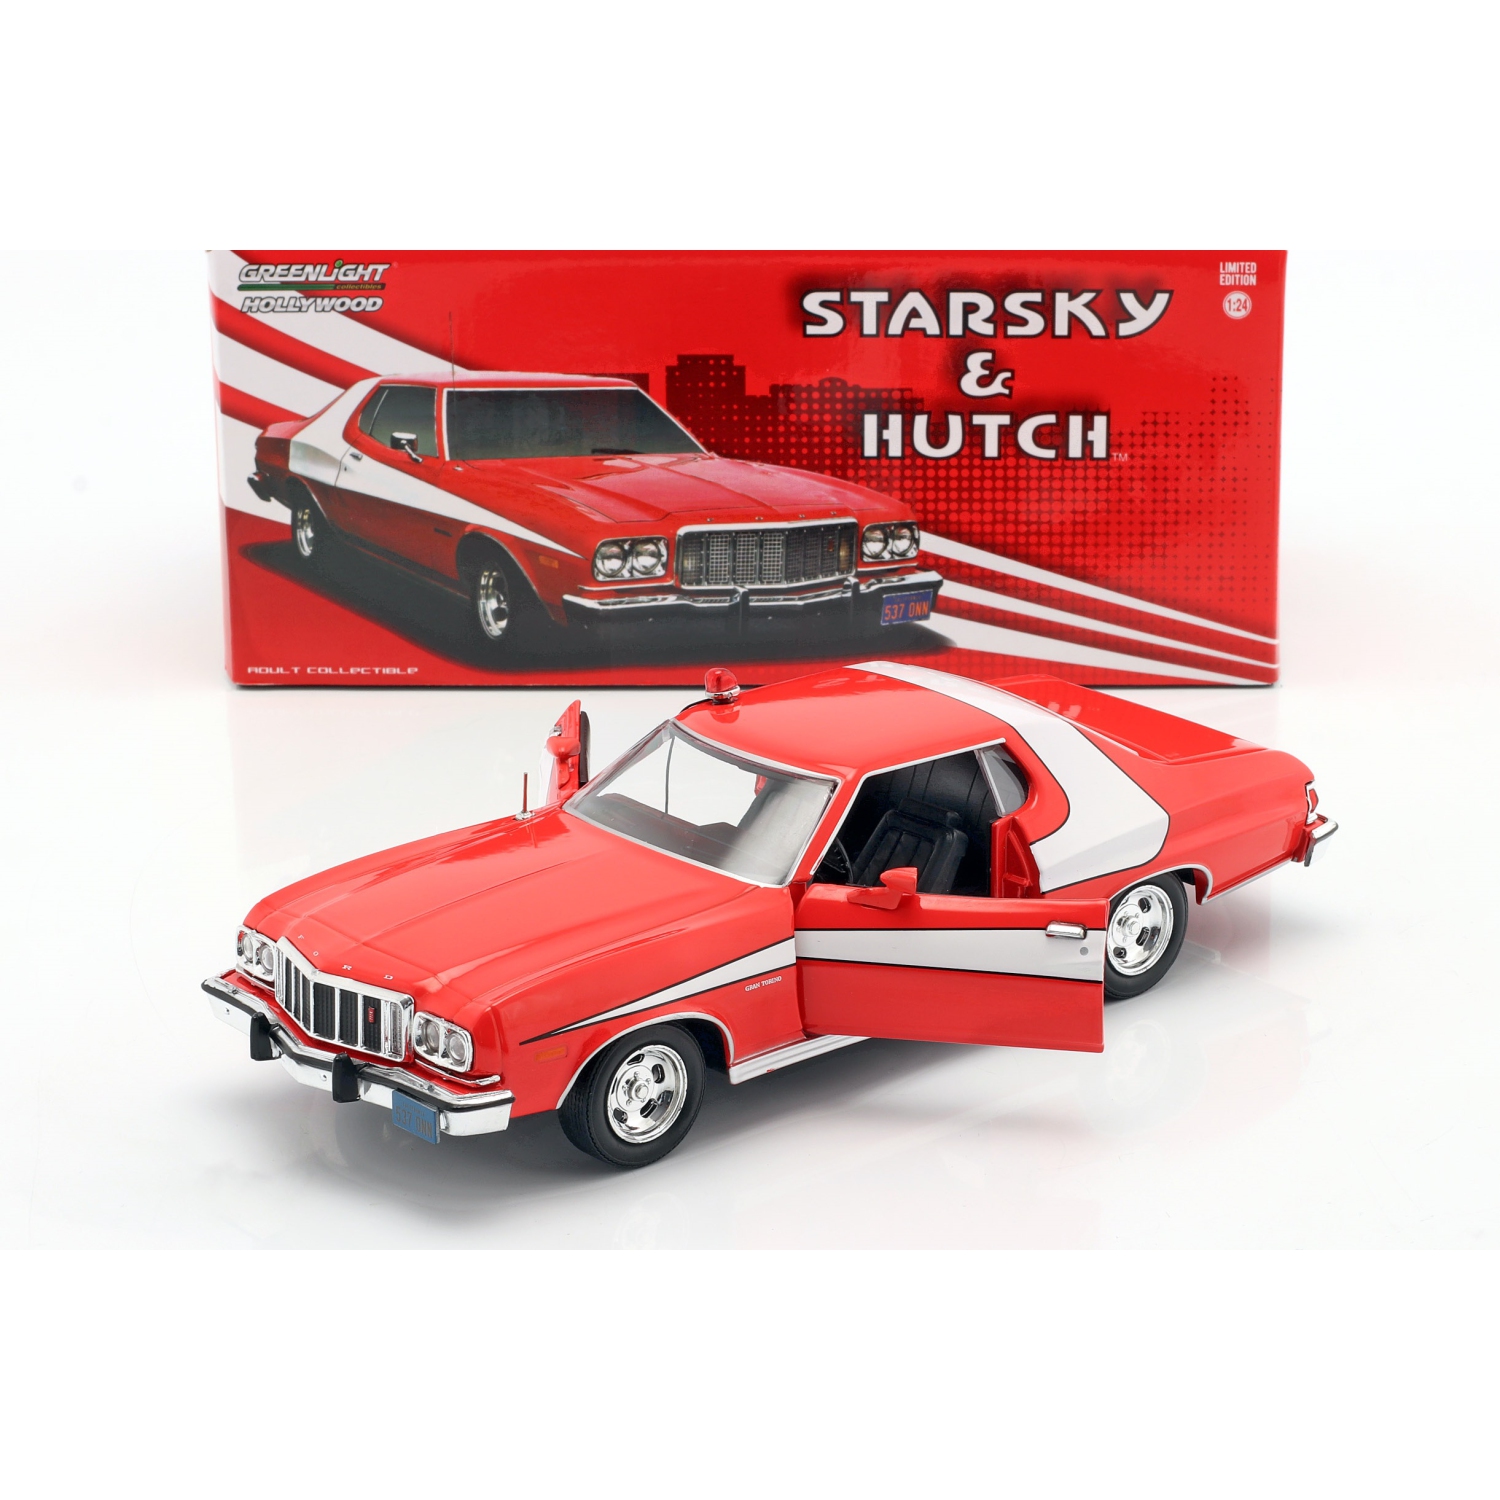 Greenlight Collectibles Artisan Collection - Starsky and Hutch - 1976 Ford Gran Torino (1:24 Scale) Die Cast Vehicle